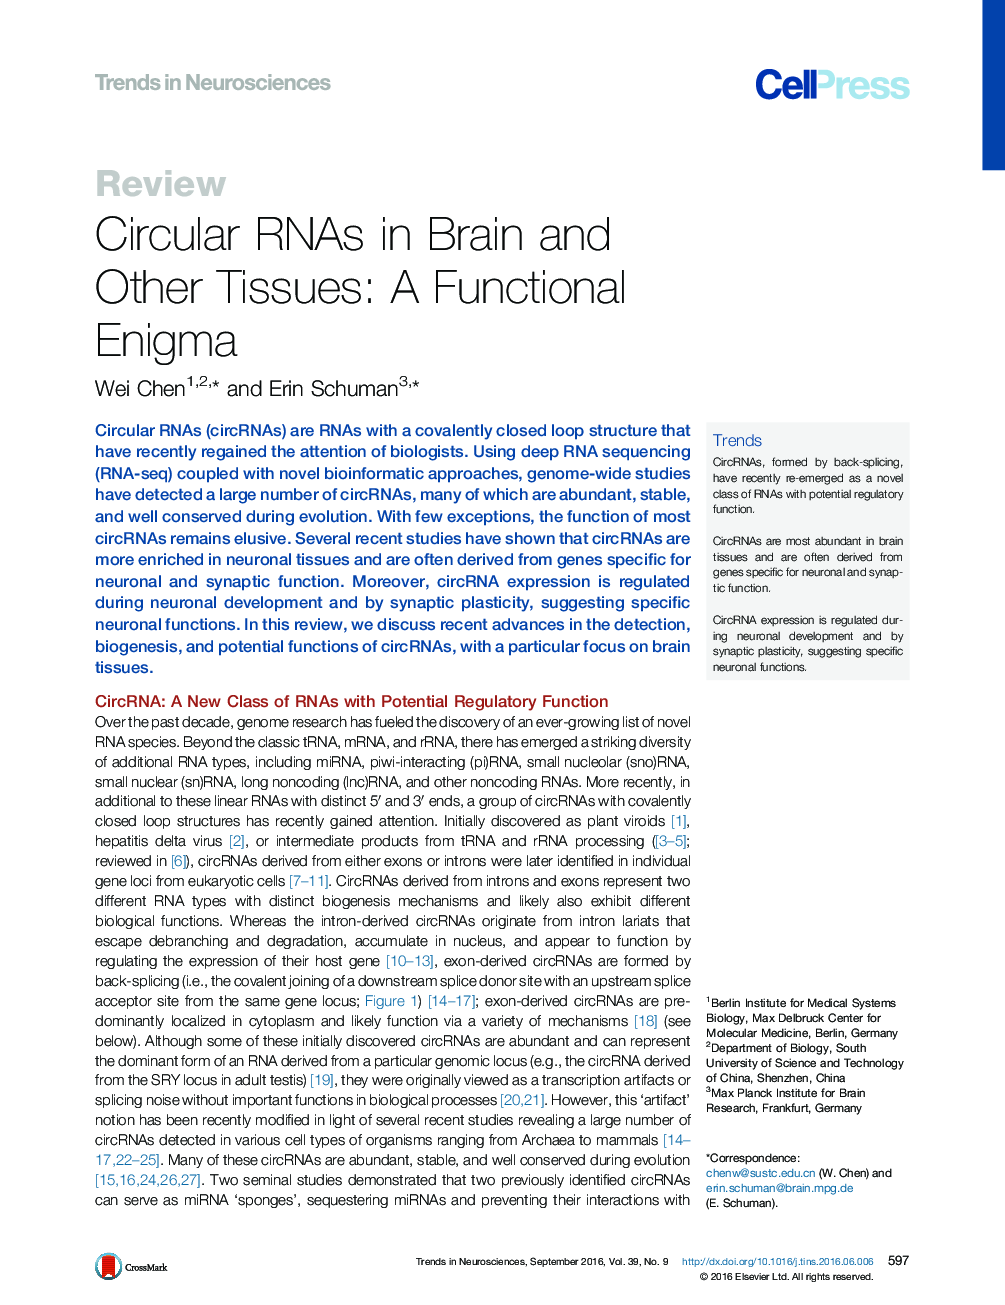 Circular RNAs in Brain and Other Tissues: A Functional Enigma